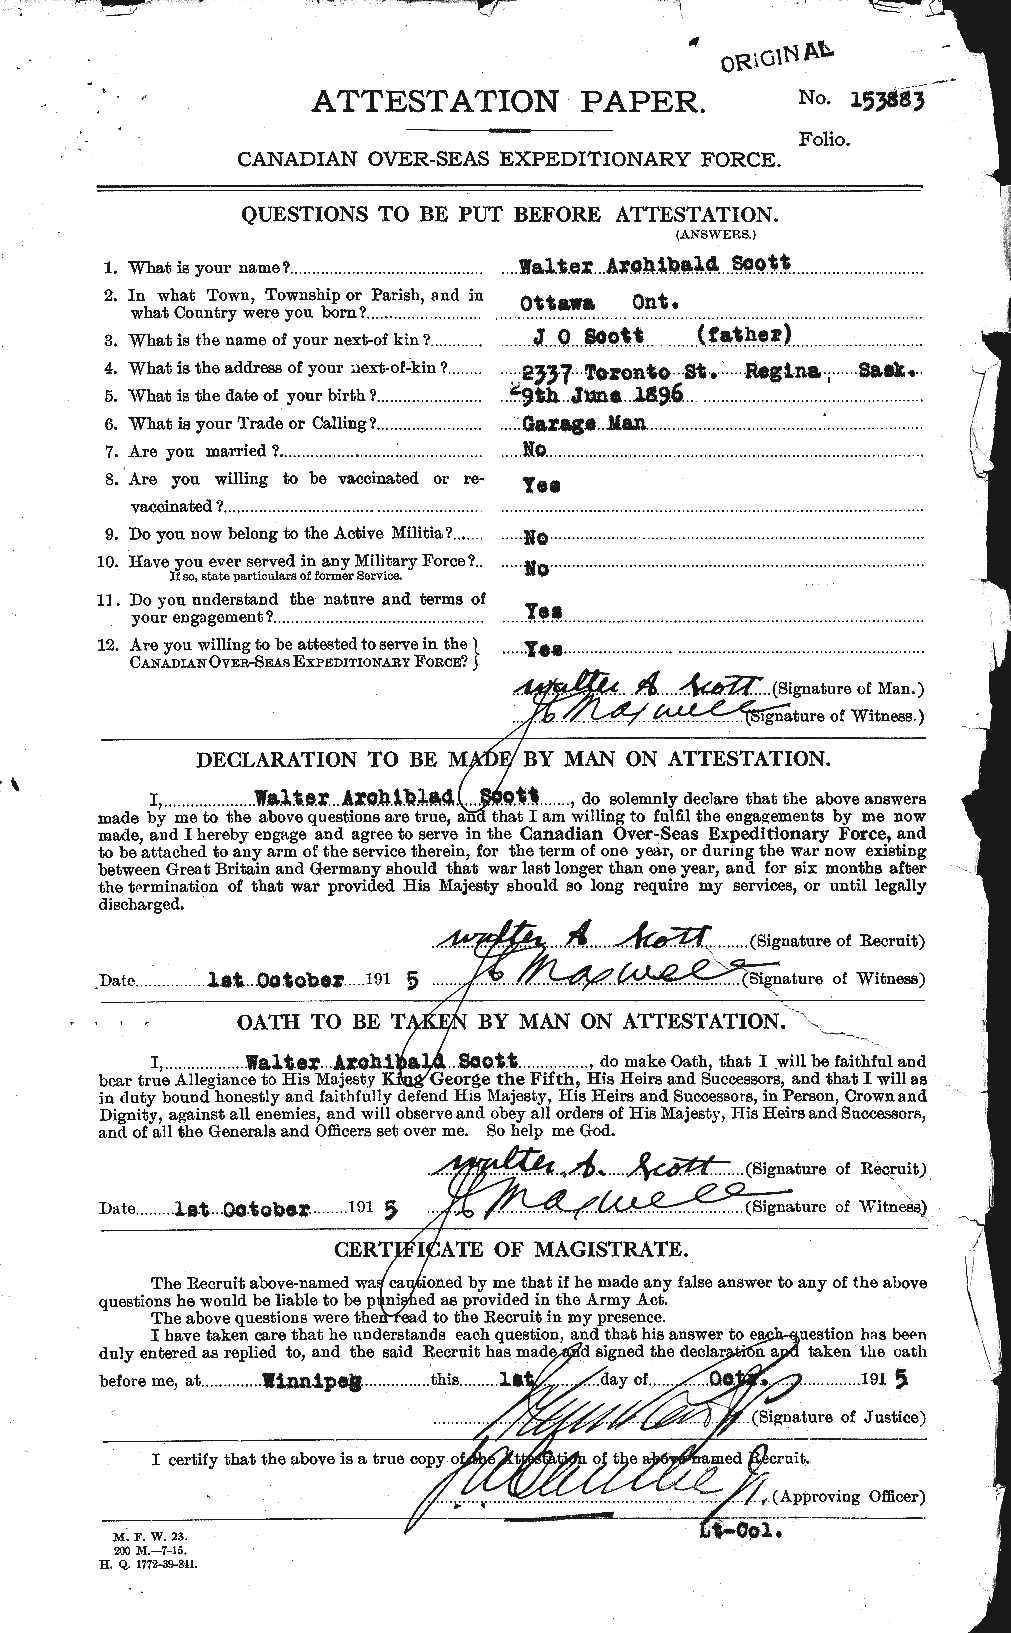 Personnel Records of the First World War - CEF 088003a